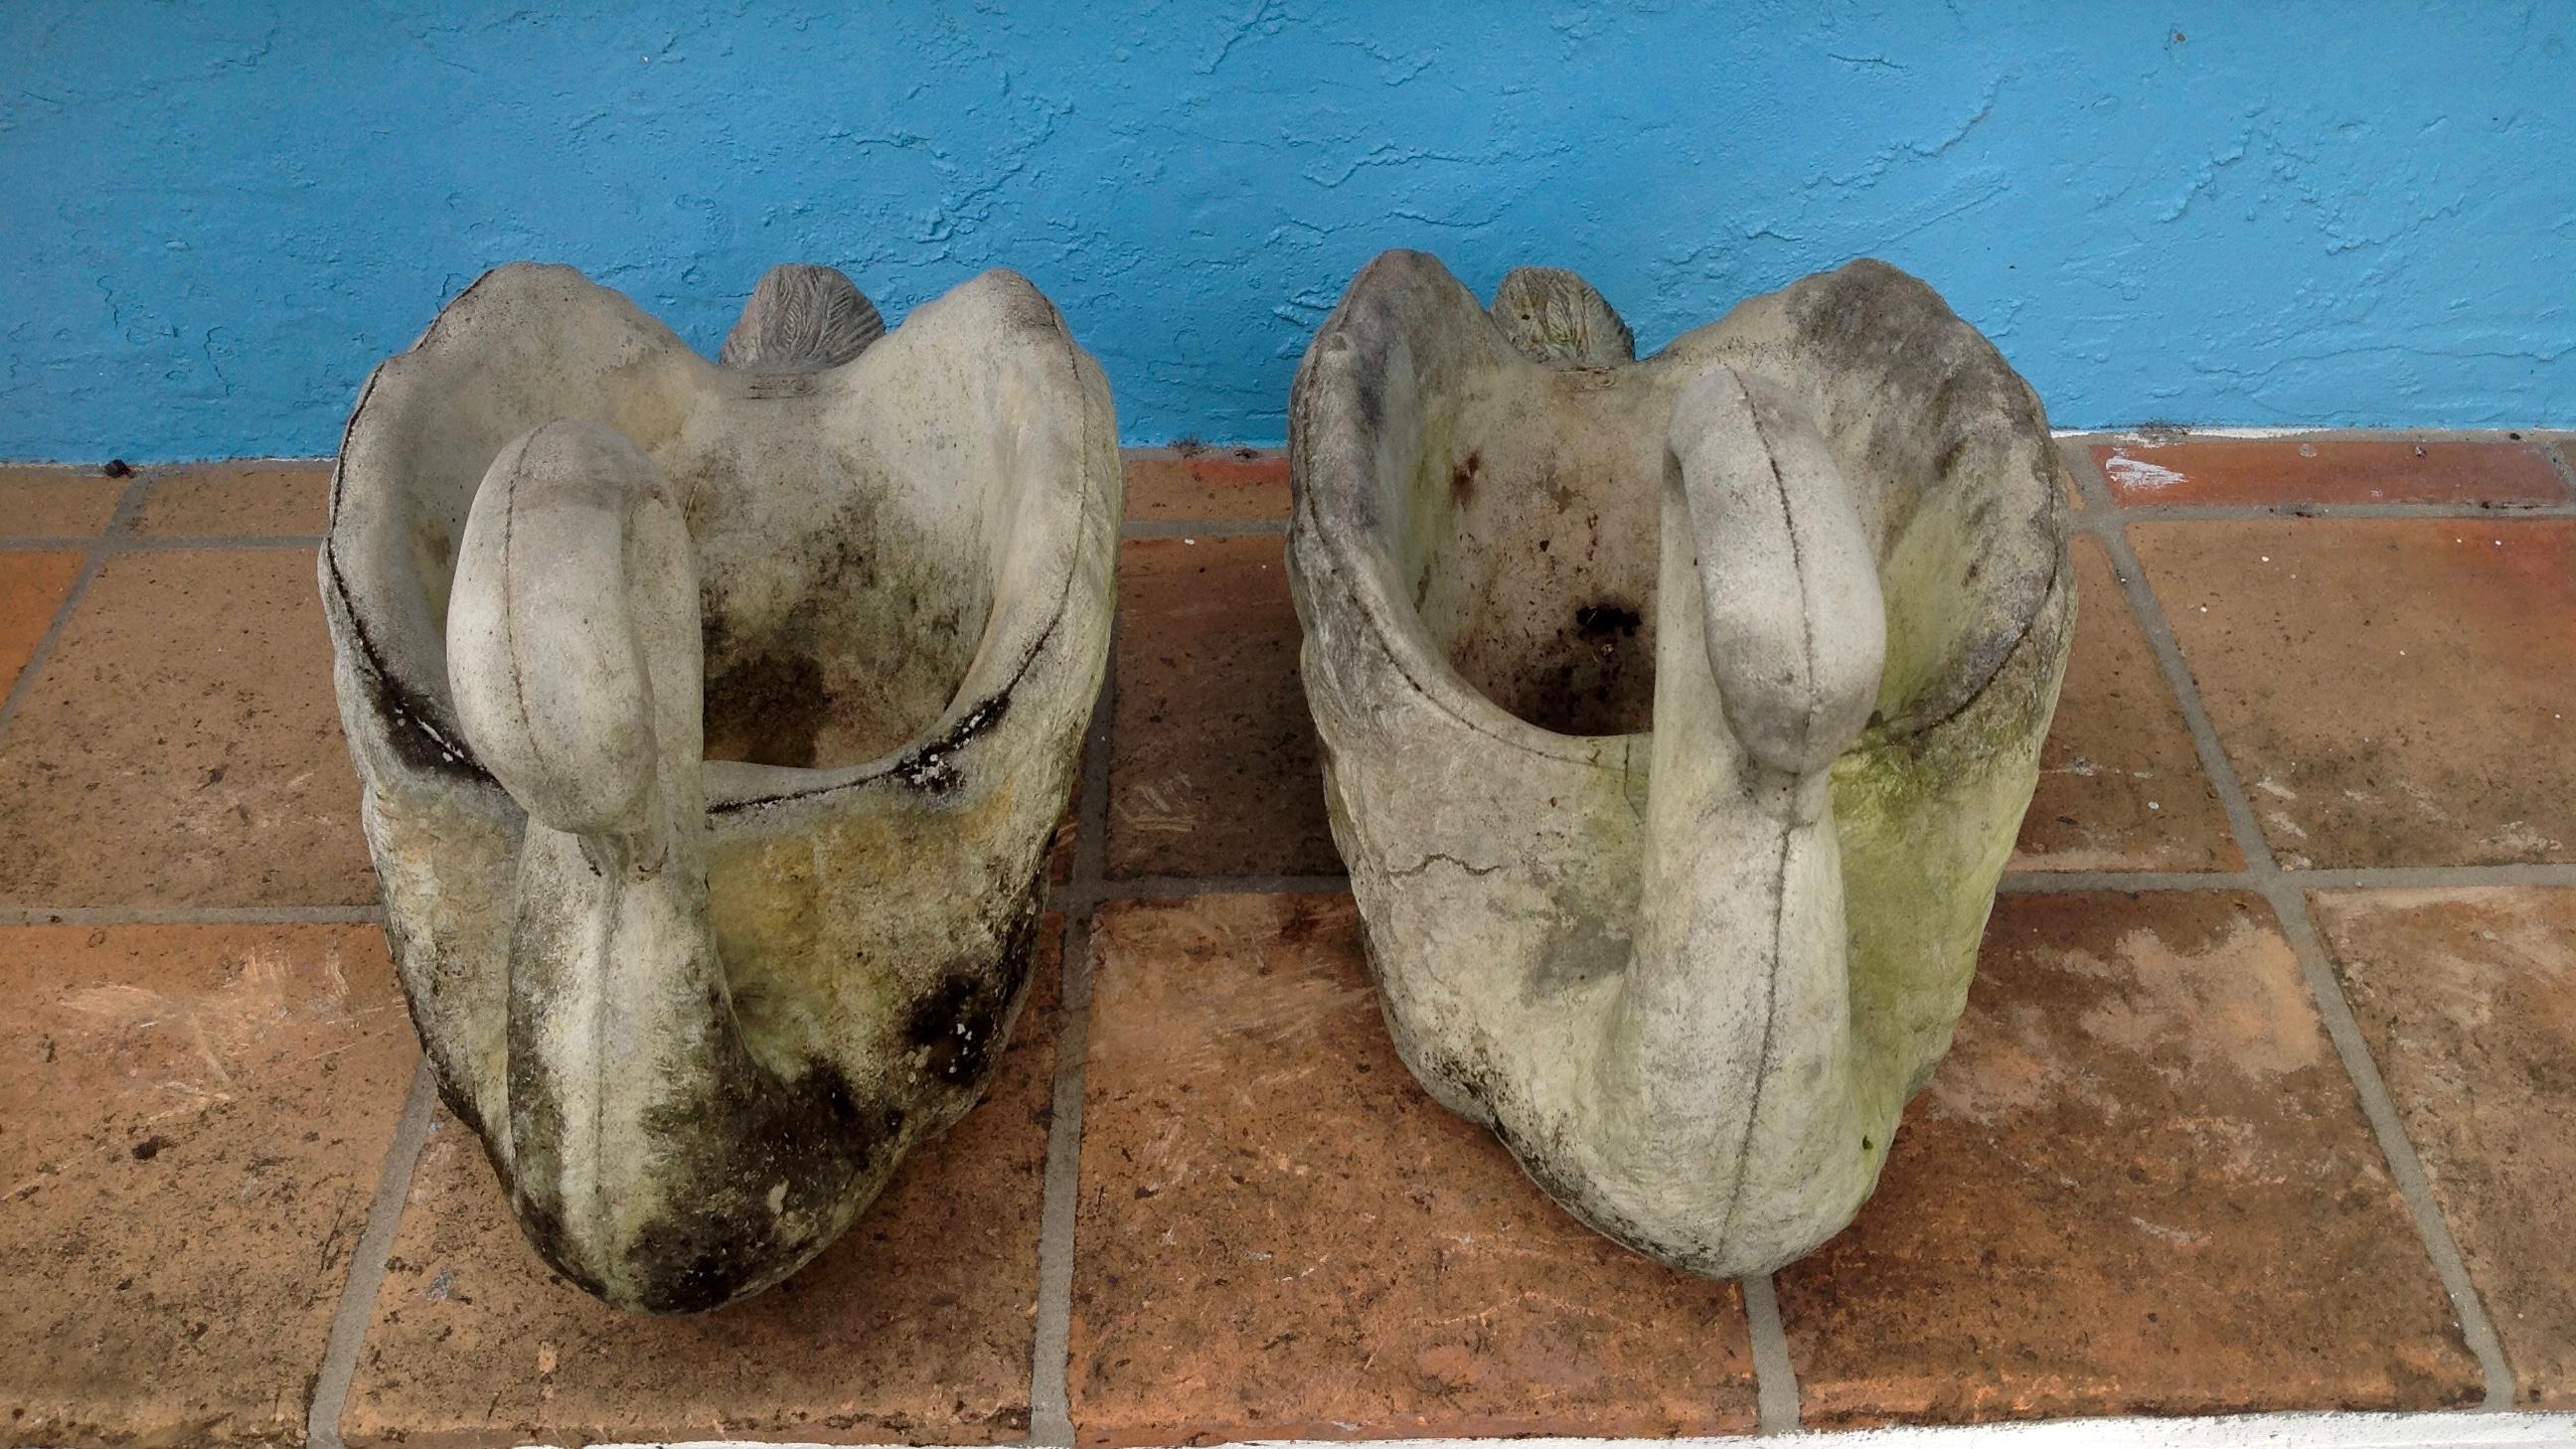 Substantial and dramatic form cast as figures of swans.
The planters have a good and earthy patina.
(A second pair is also available). Price shown is for one pair only.